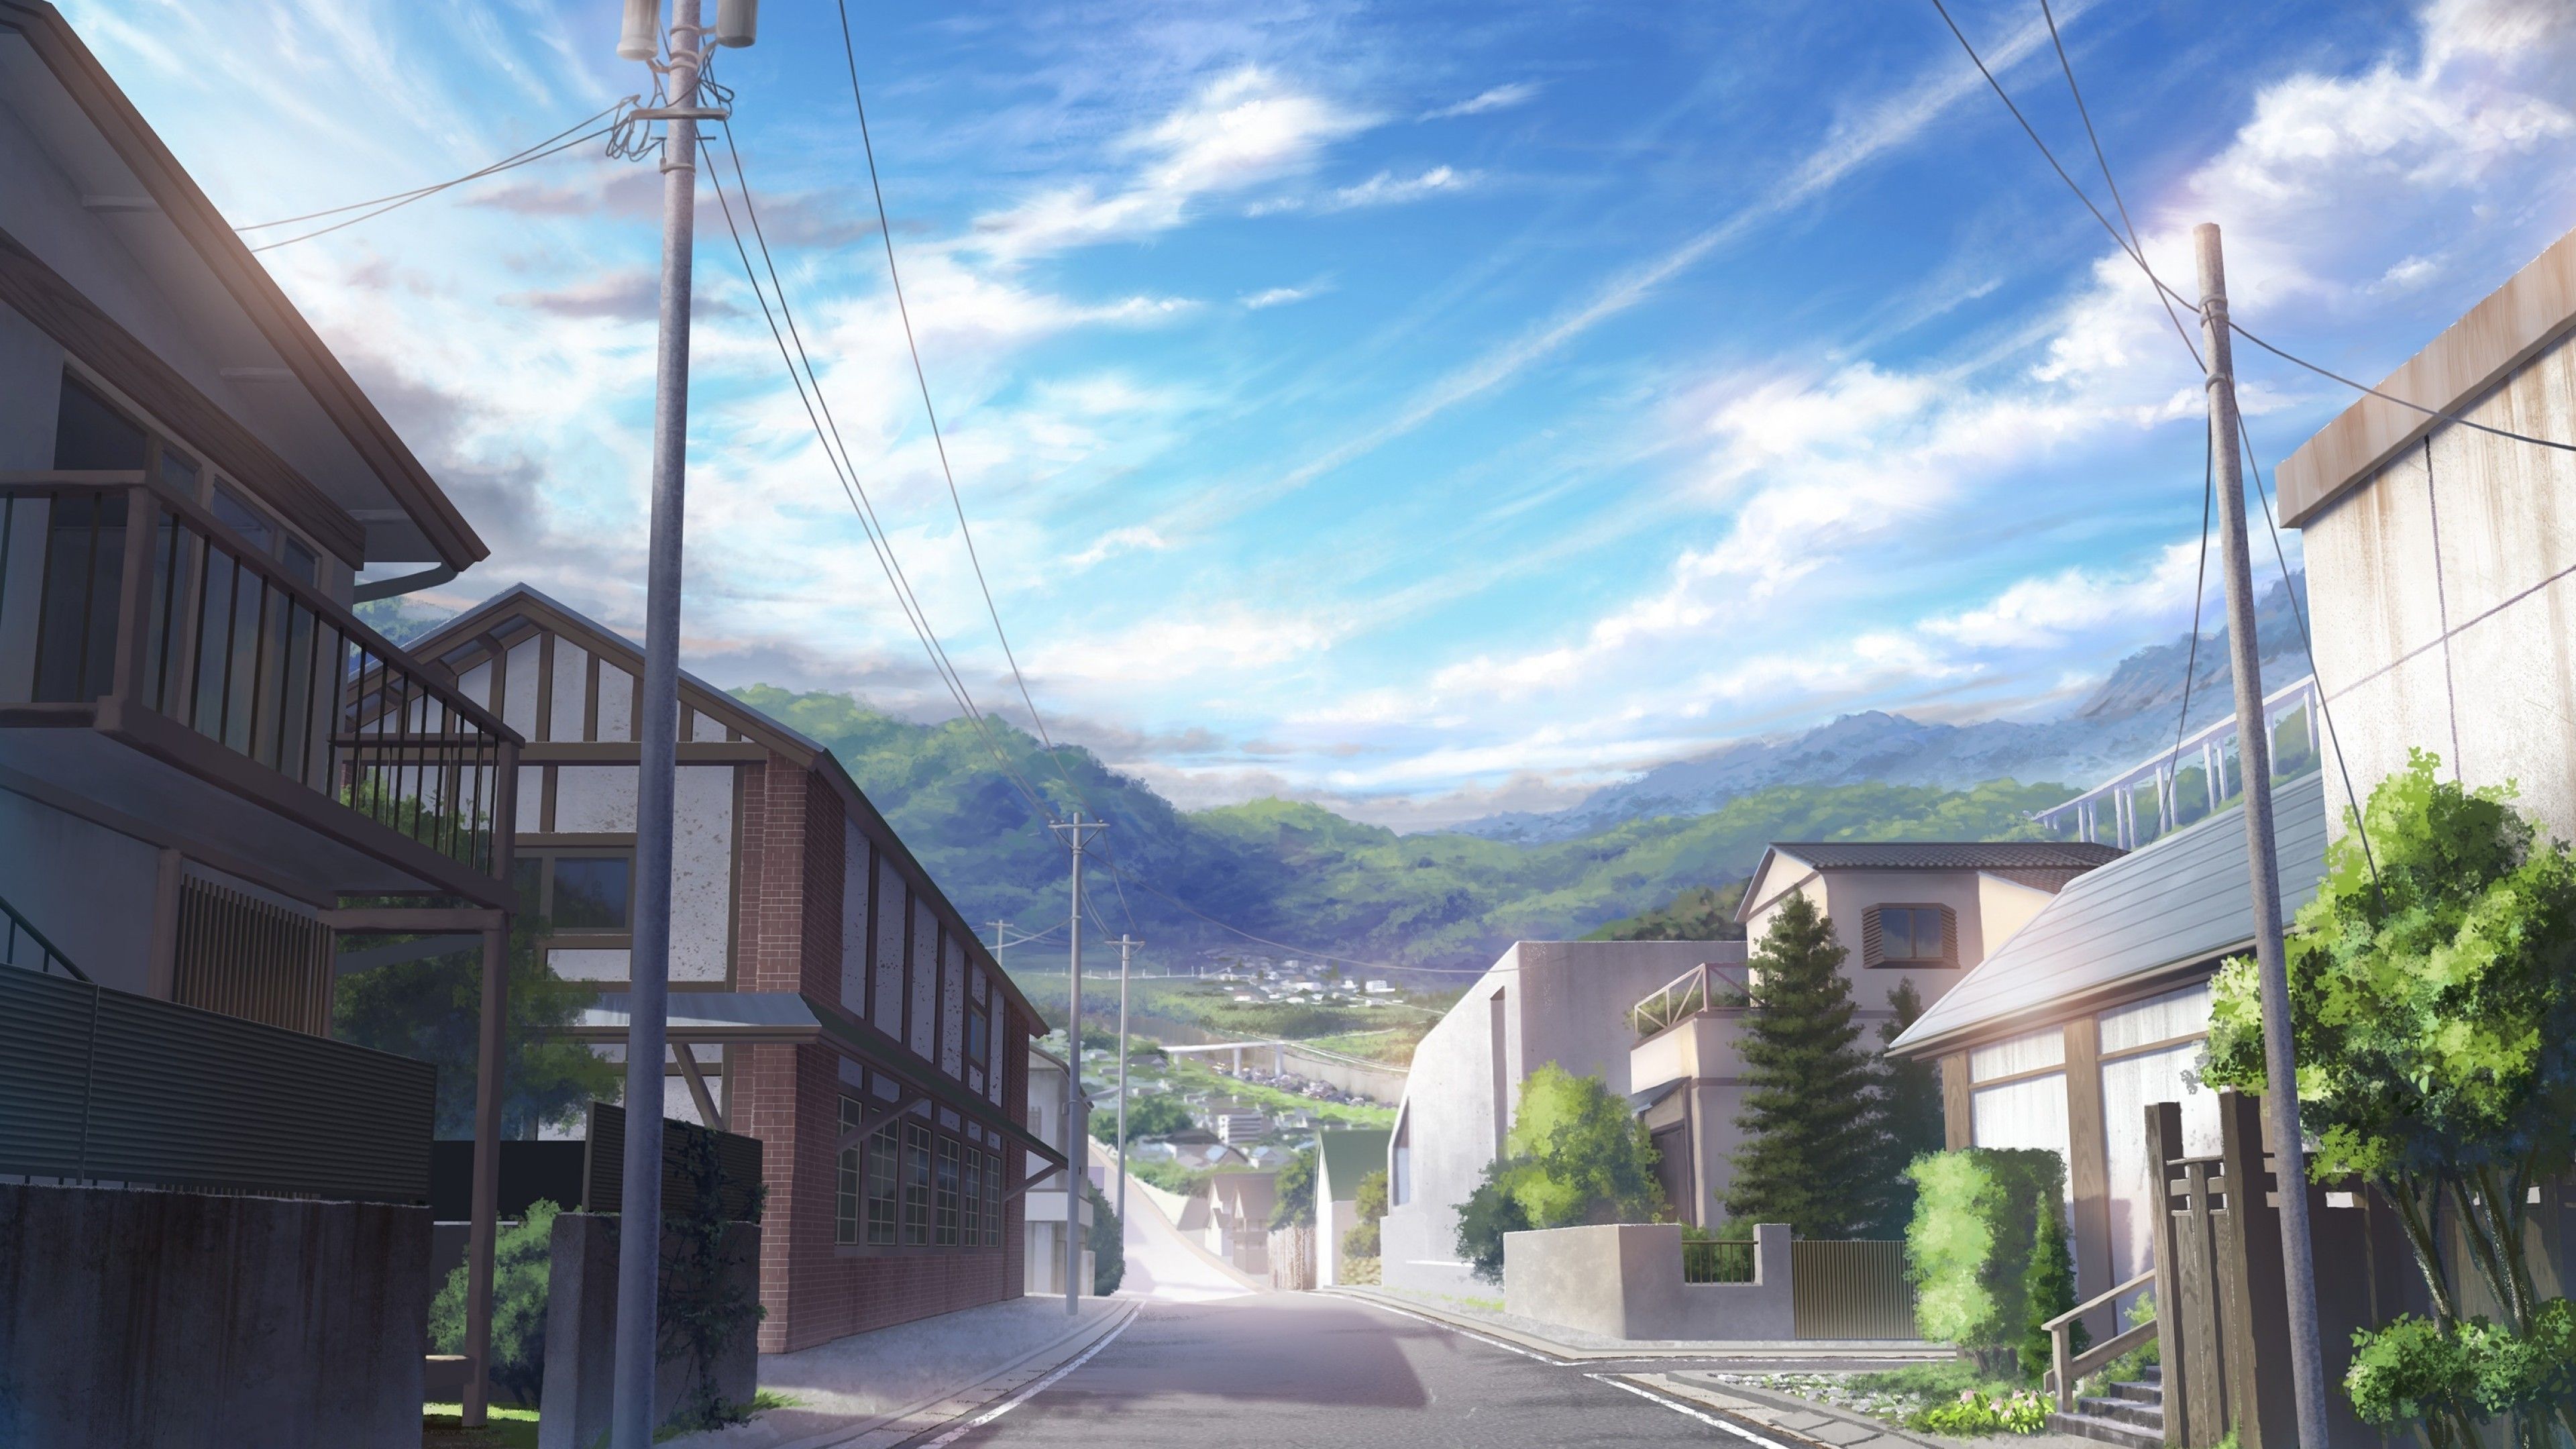 Download 3840x2160 Anime Street, Buildings, Clouds, Scenic Wallpaper for UHD TV